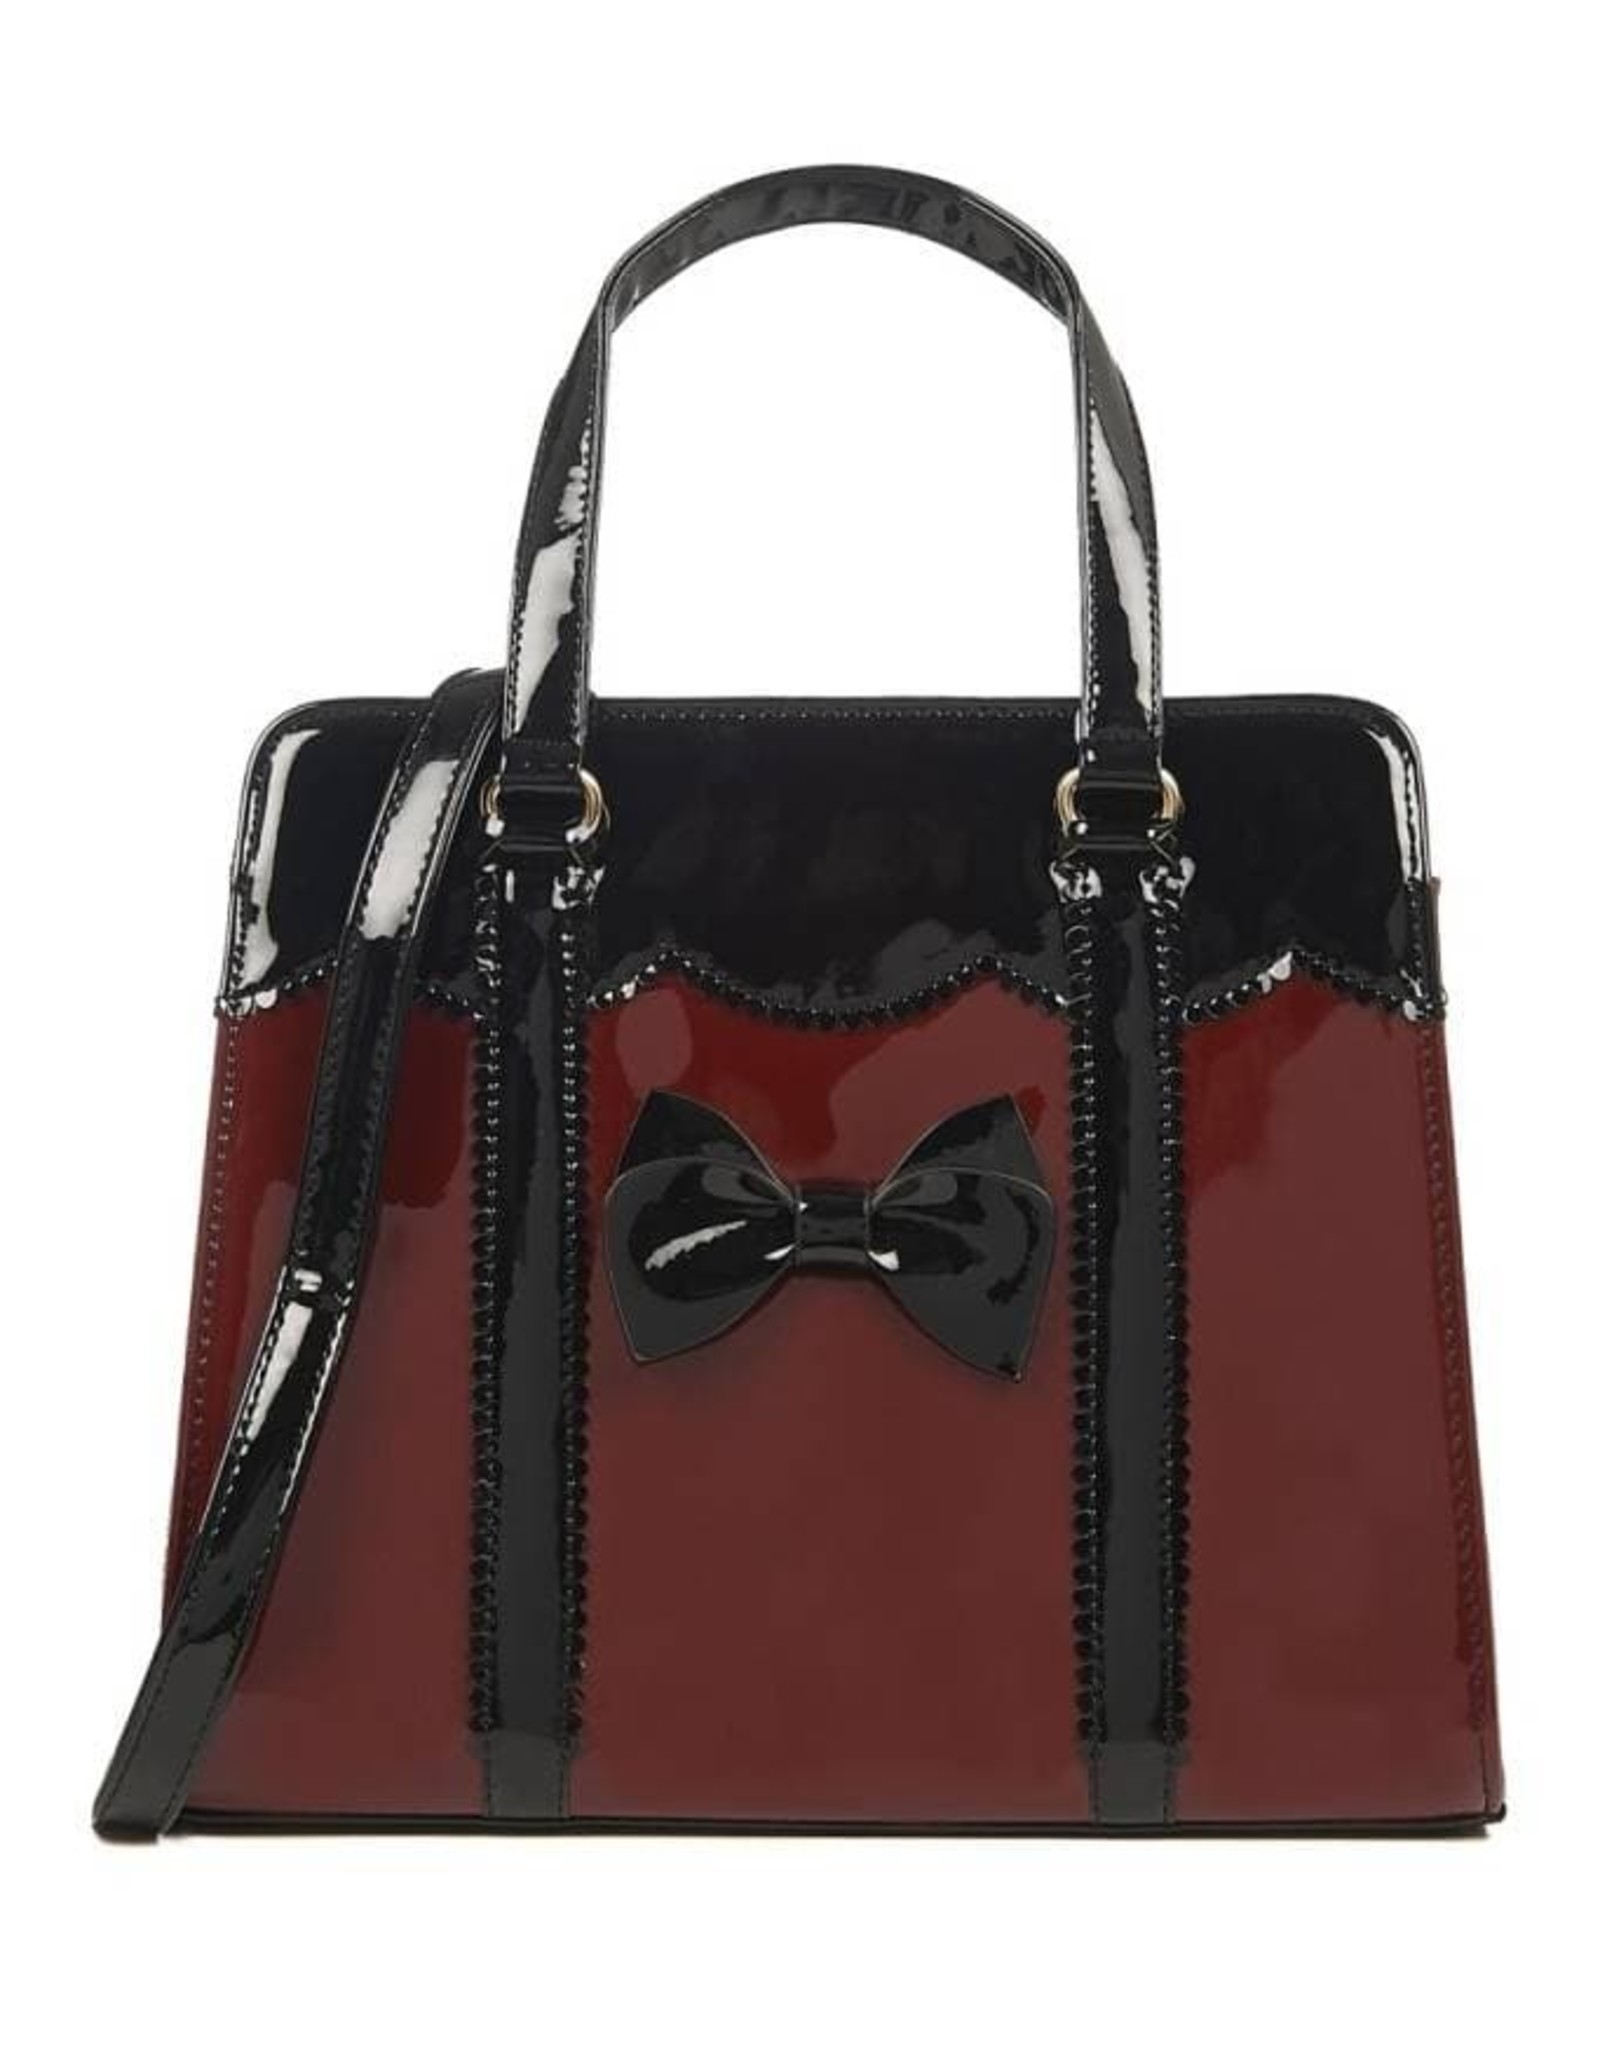 Banned Retro bags and Vintage bags - Banned Juicy Bits Retro bag burgundy